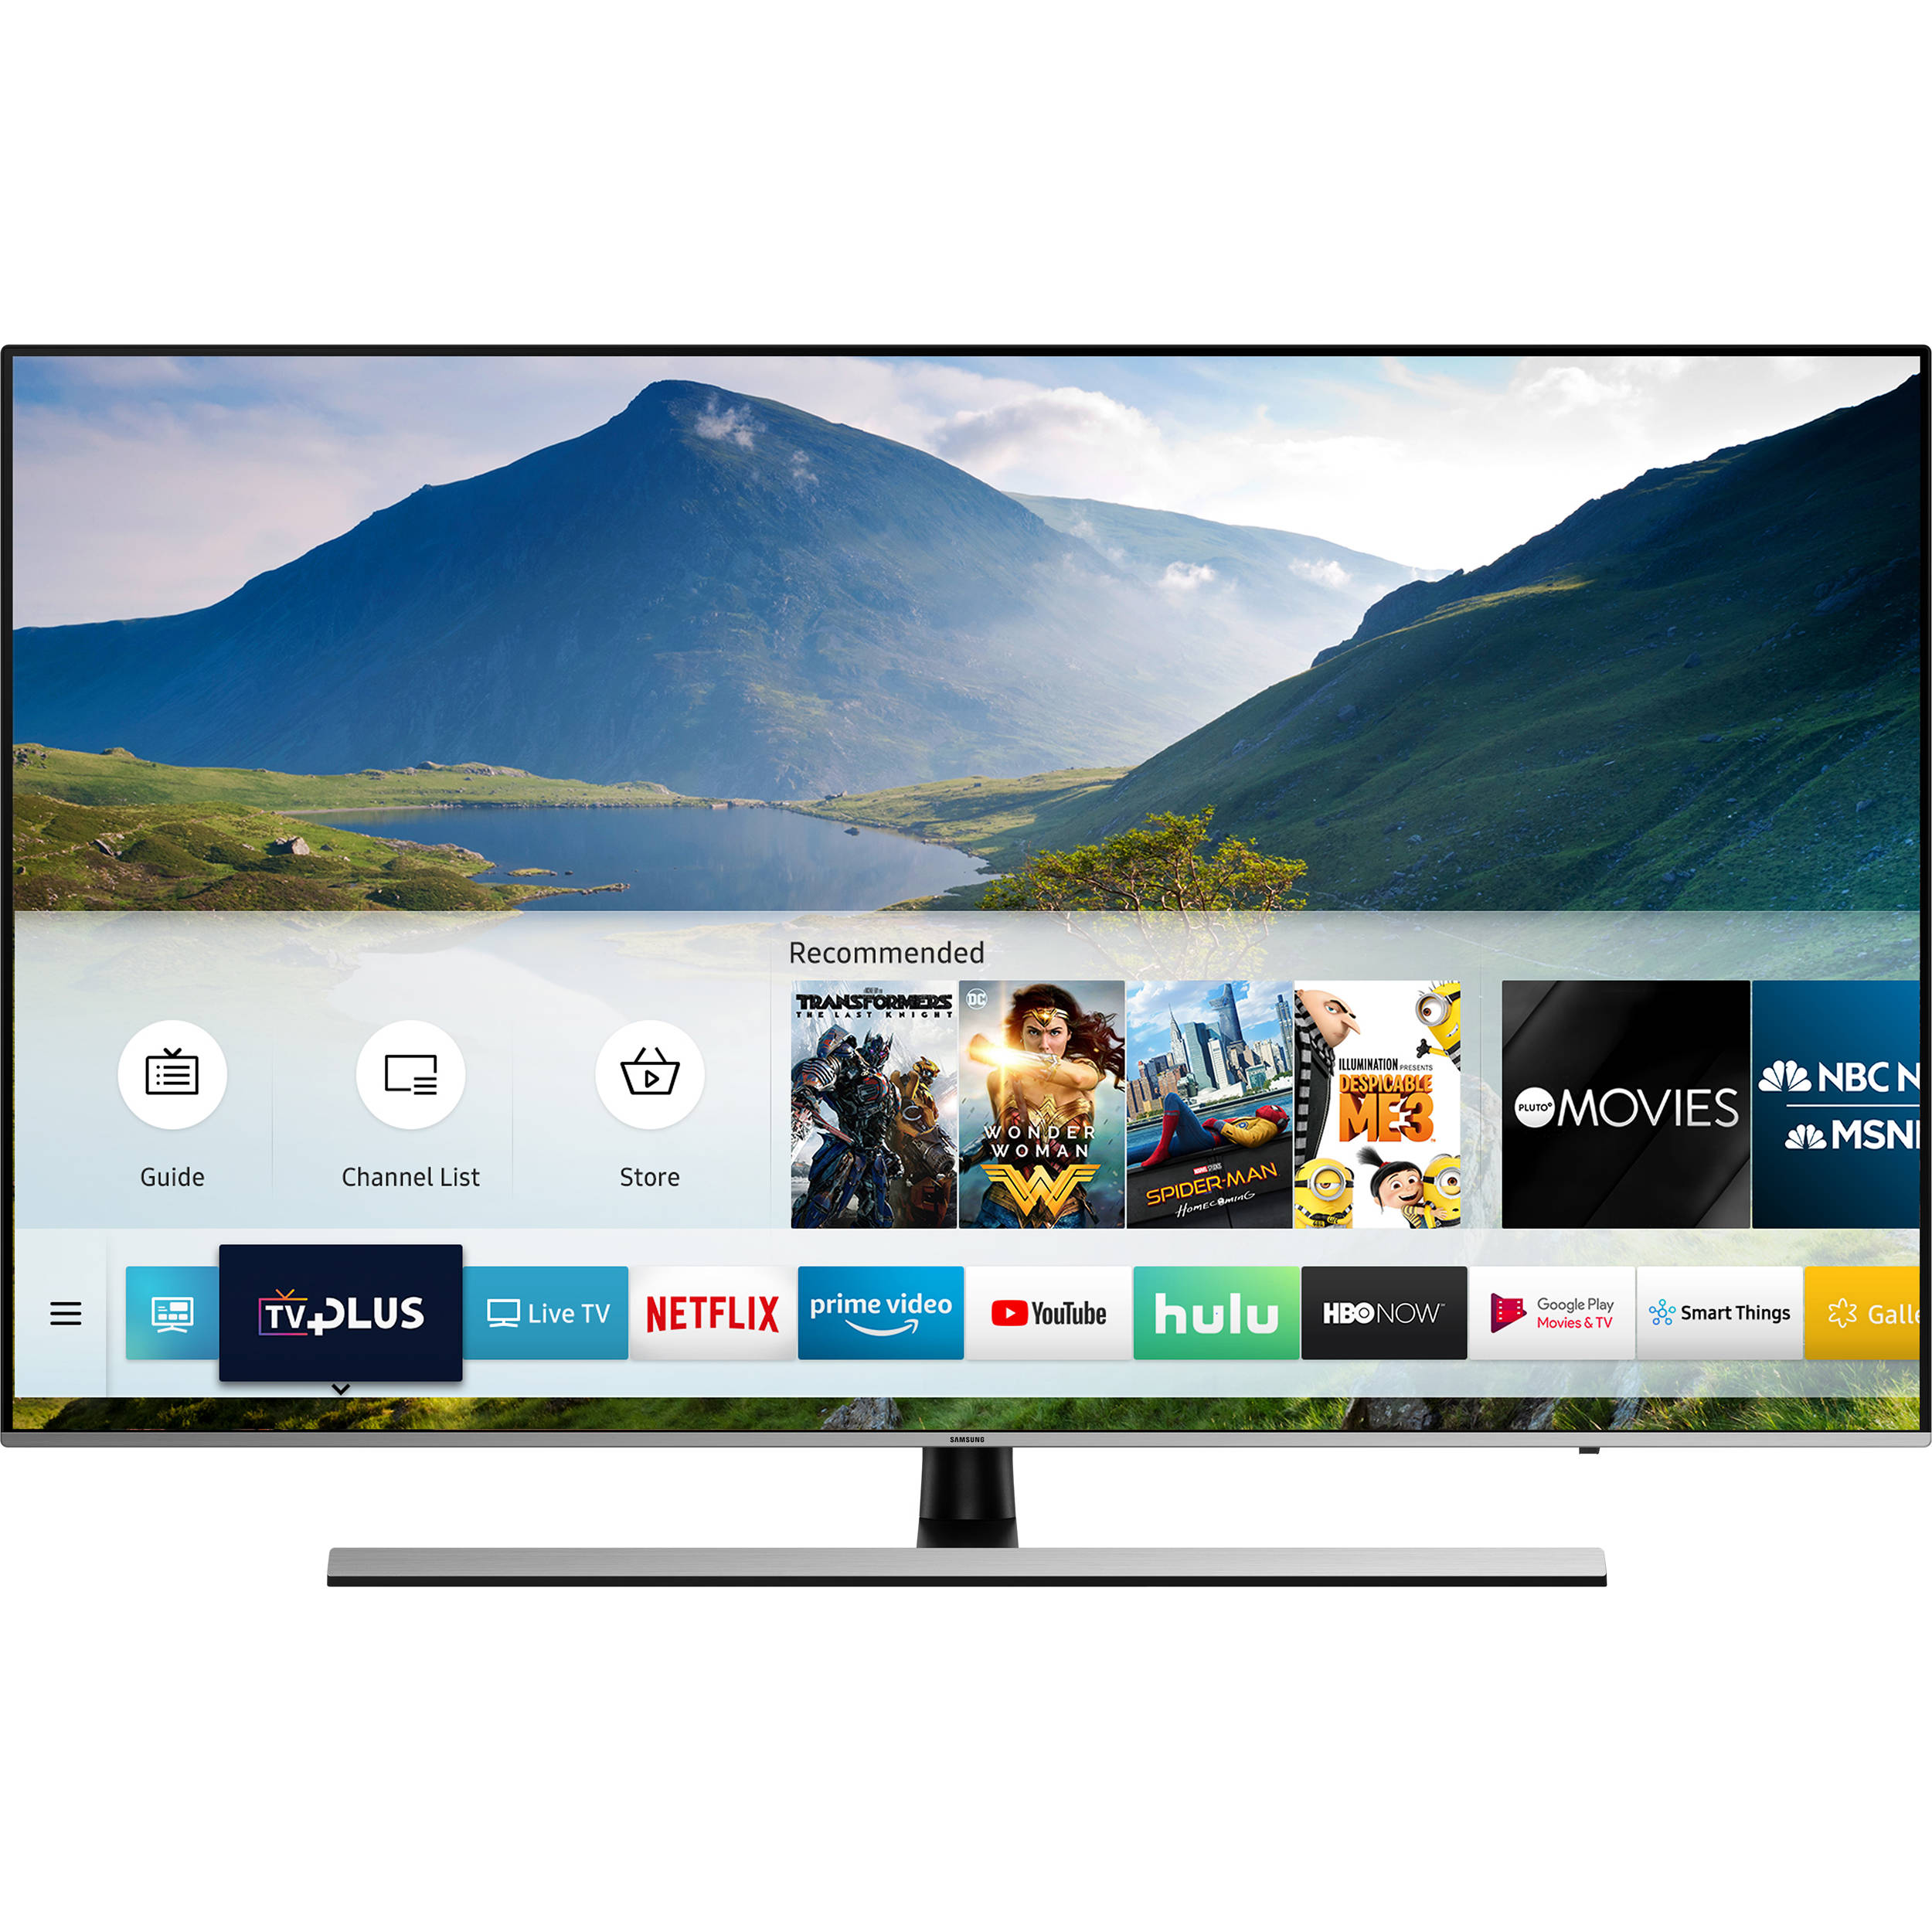 Tizen Pluto Tv / Pluto Tv Samsung Smart Tv Download And Installation Guide / All the tools ...